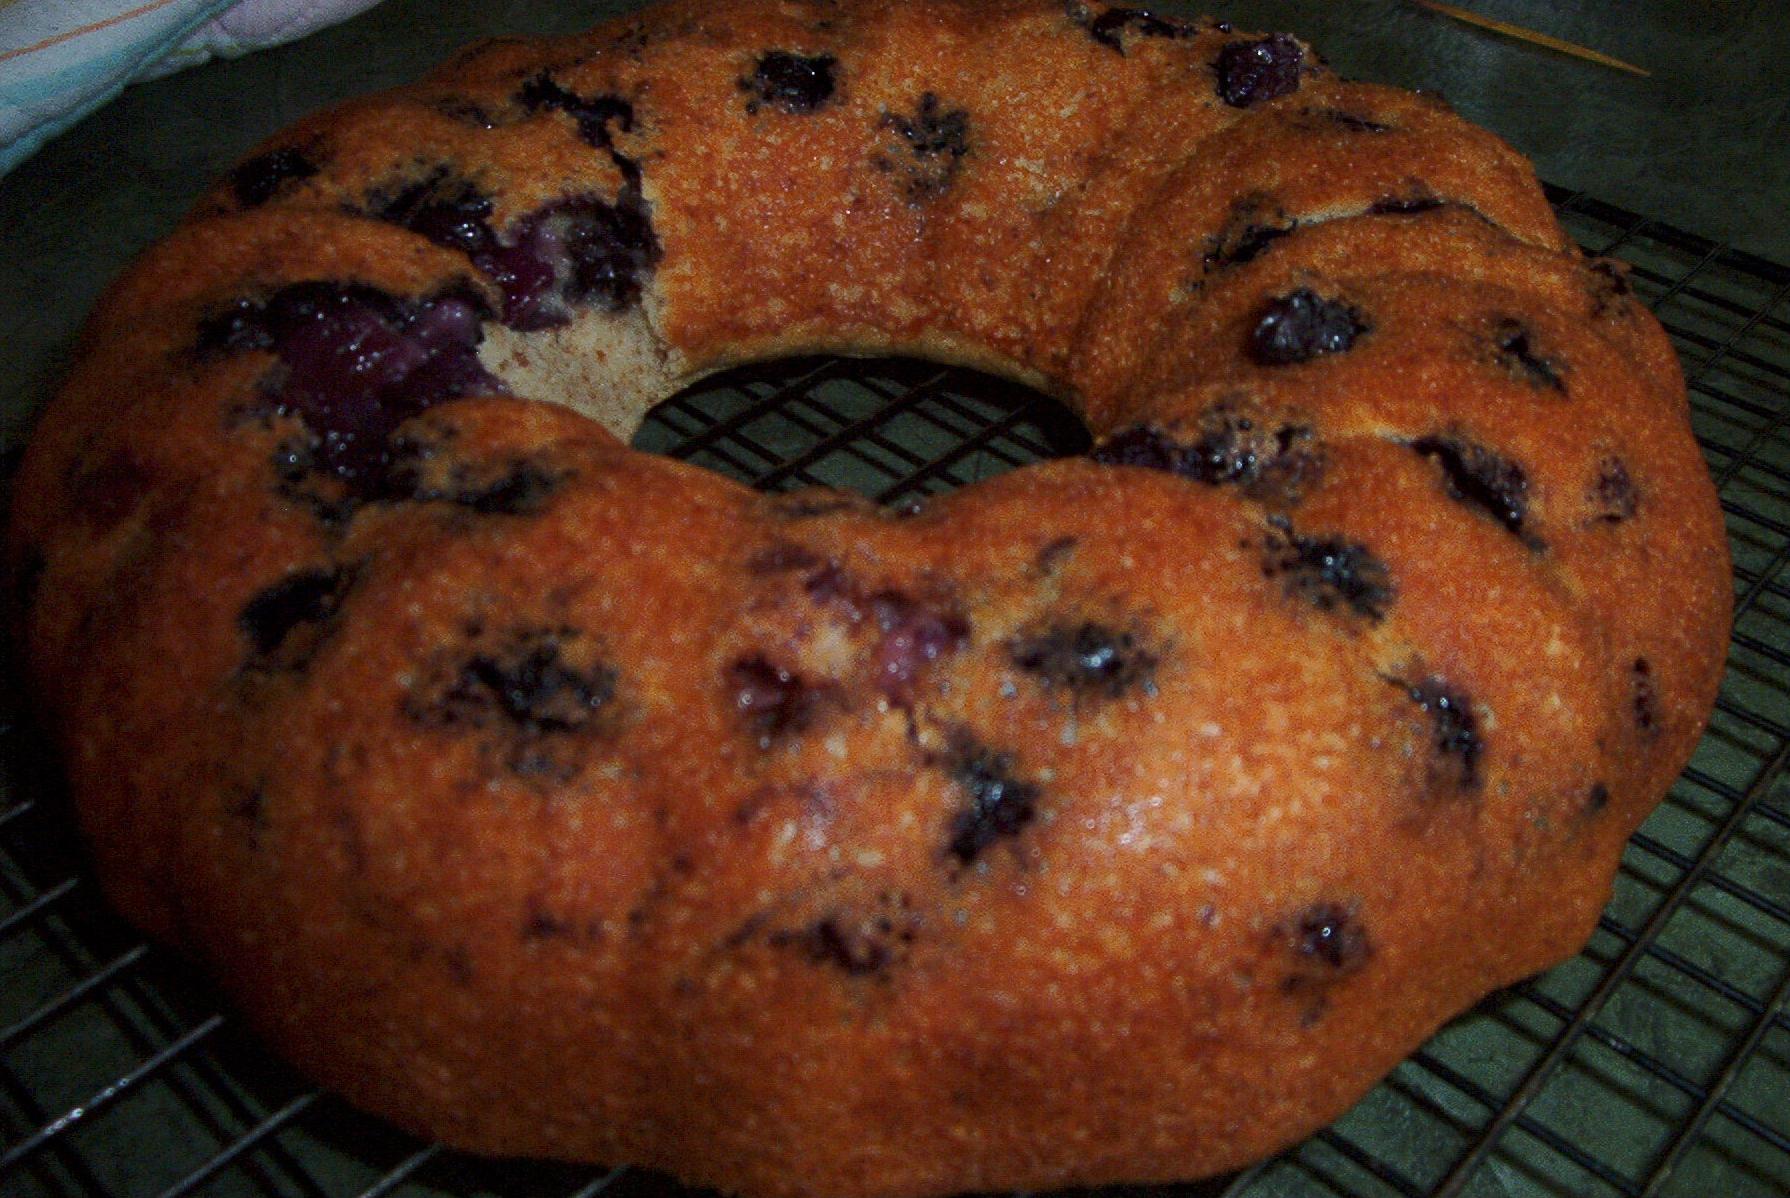  A slice of heaven on a plate - Blueberry Cinnamon Coffee Cake